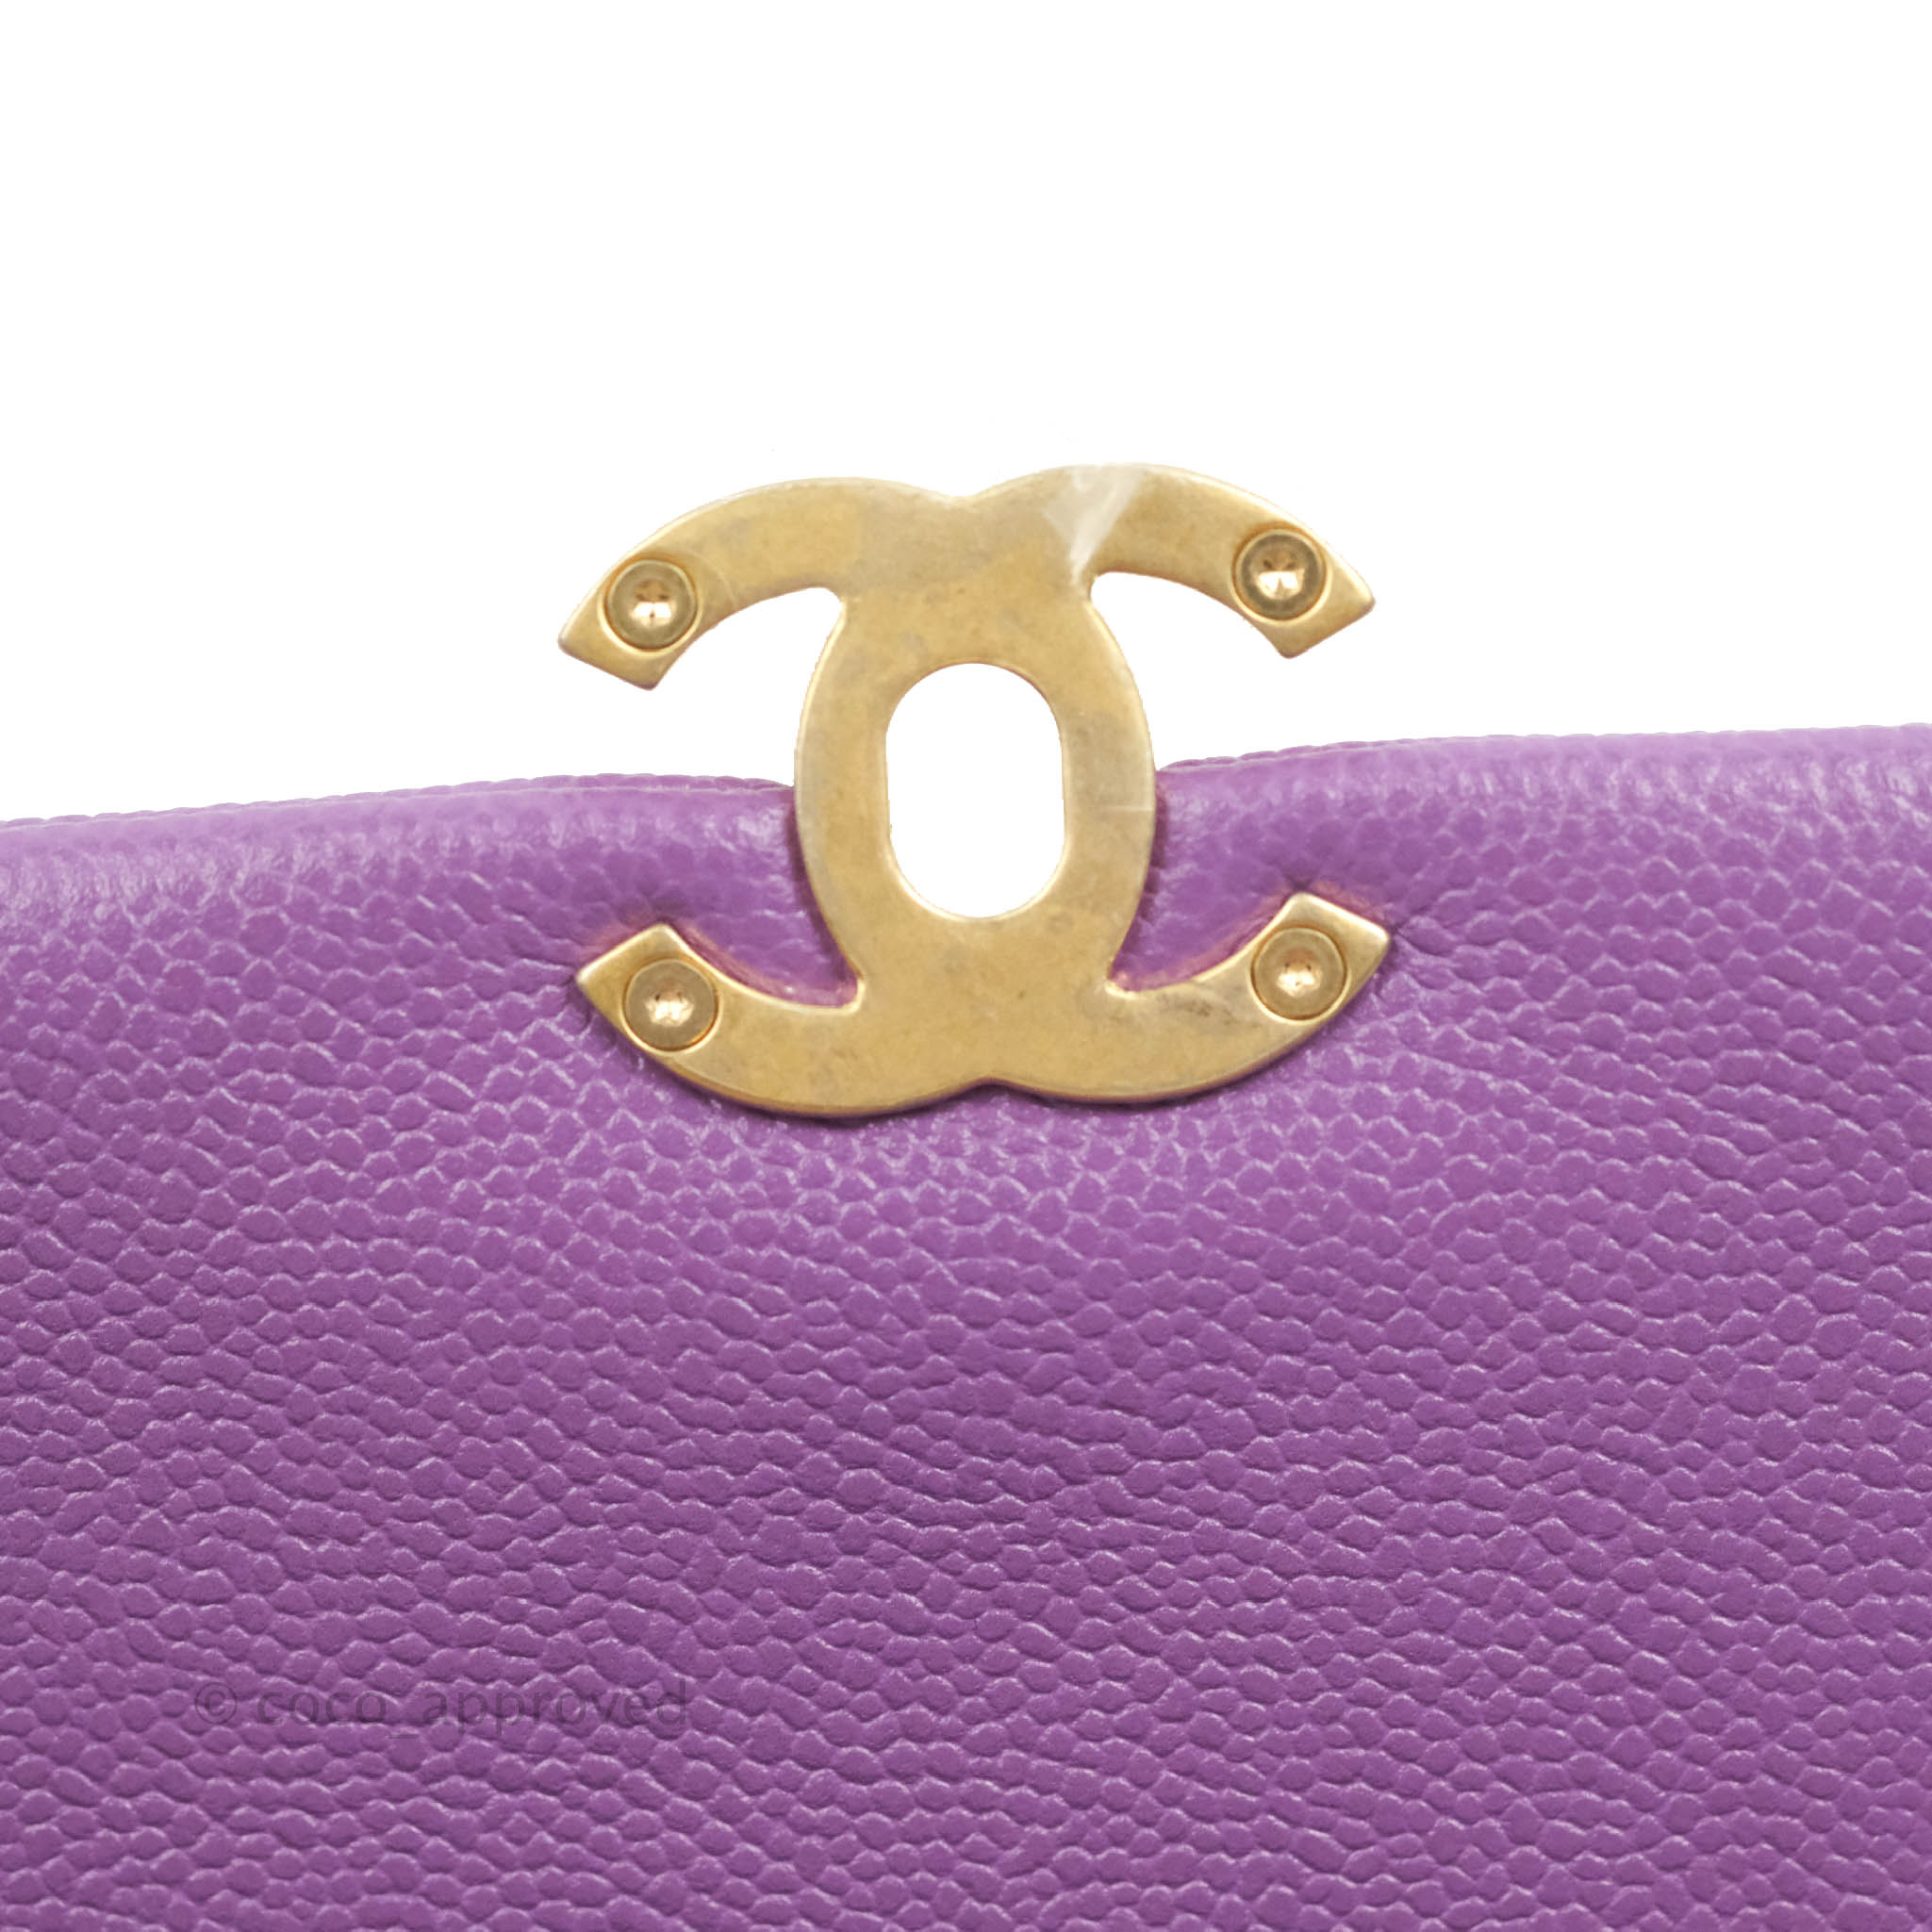 Chanel Small Quilted Melody Flap Purple Caviar Aged Gold Hardware – Coco  Approved Studio